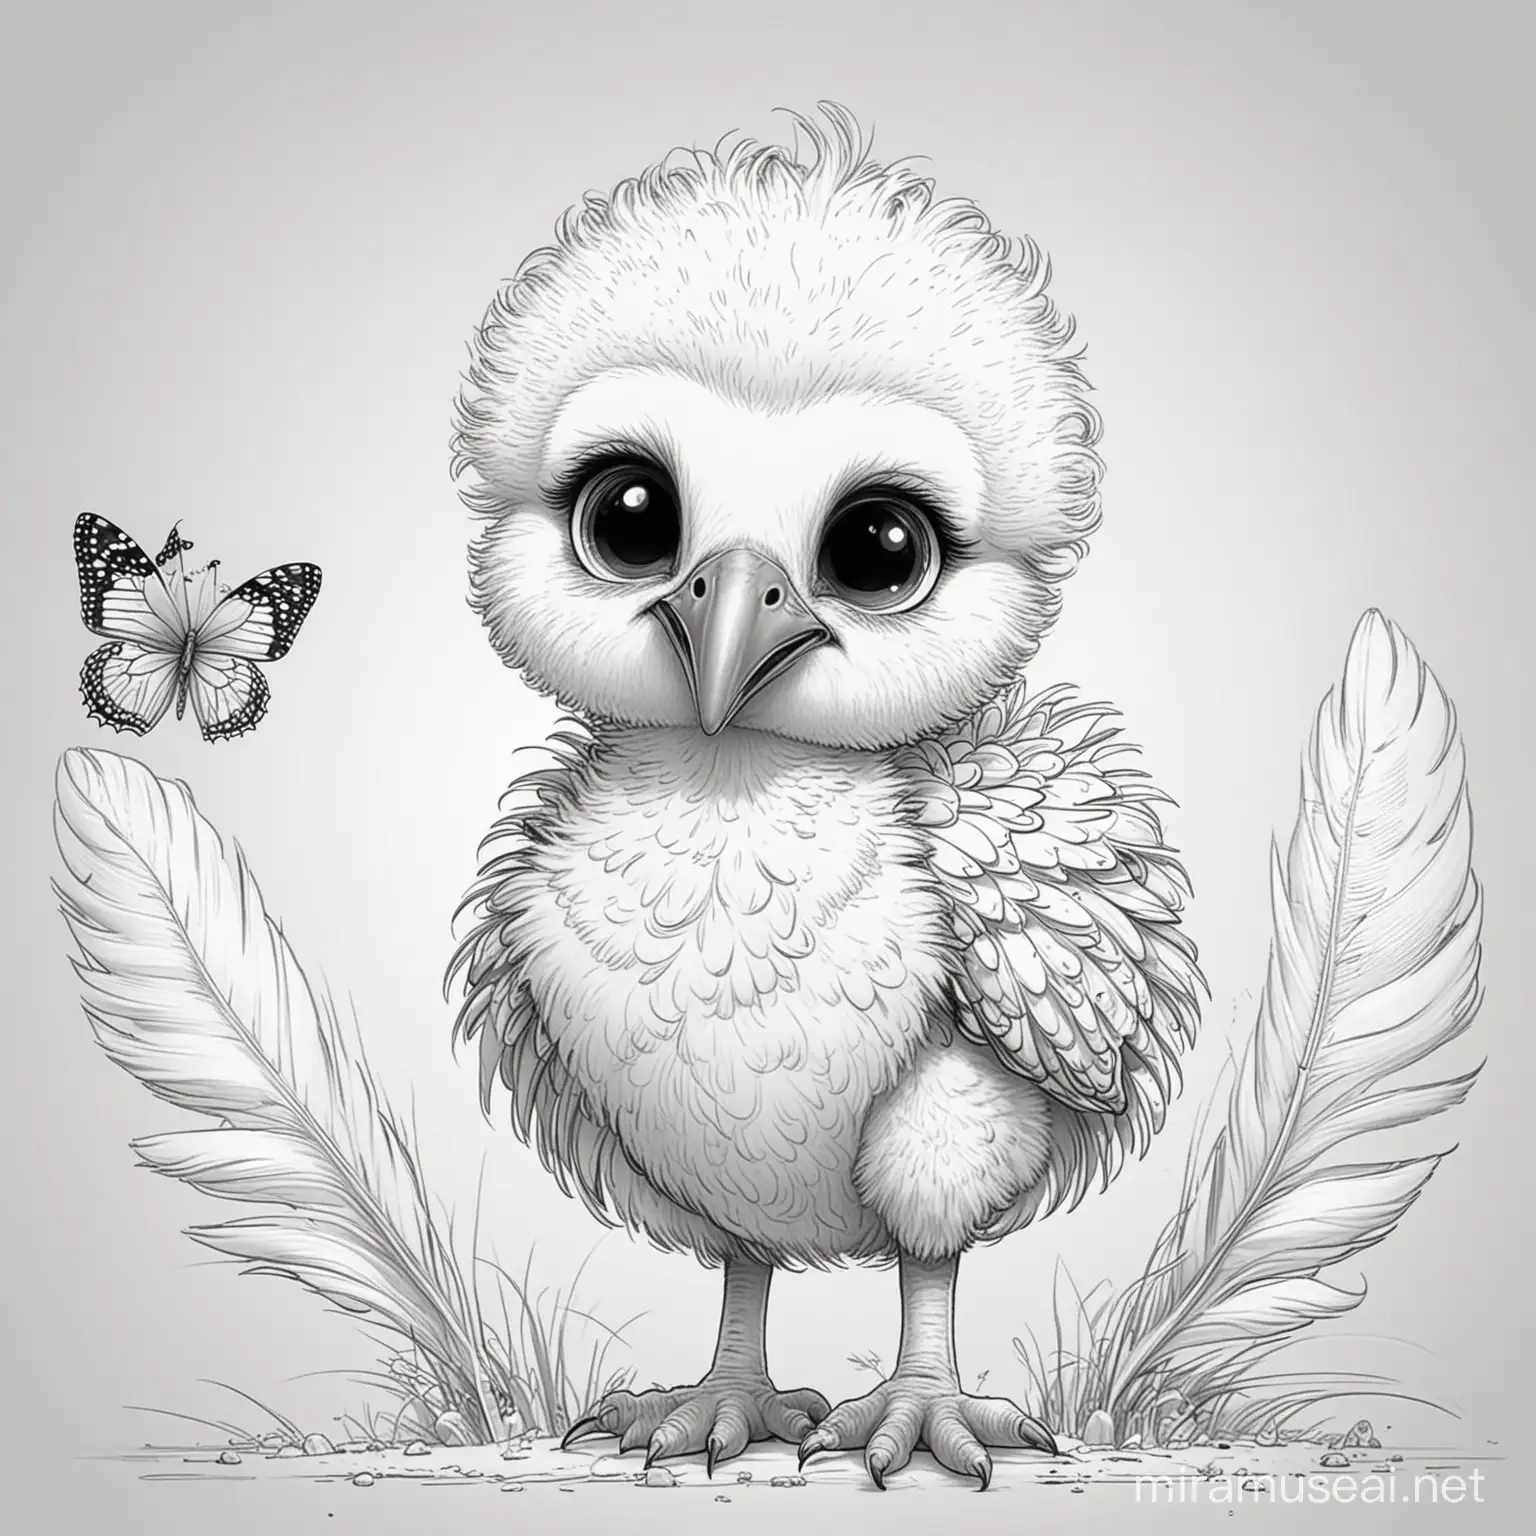 Coloring book, cartoon drawing, clean black and white, single line, in center of aspect ratio 916, white background, cute ostrich chick, with a butterfly perched on its fluffy feathers